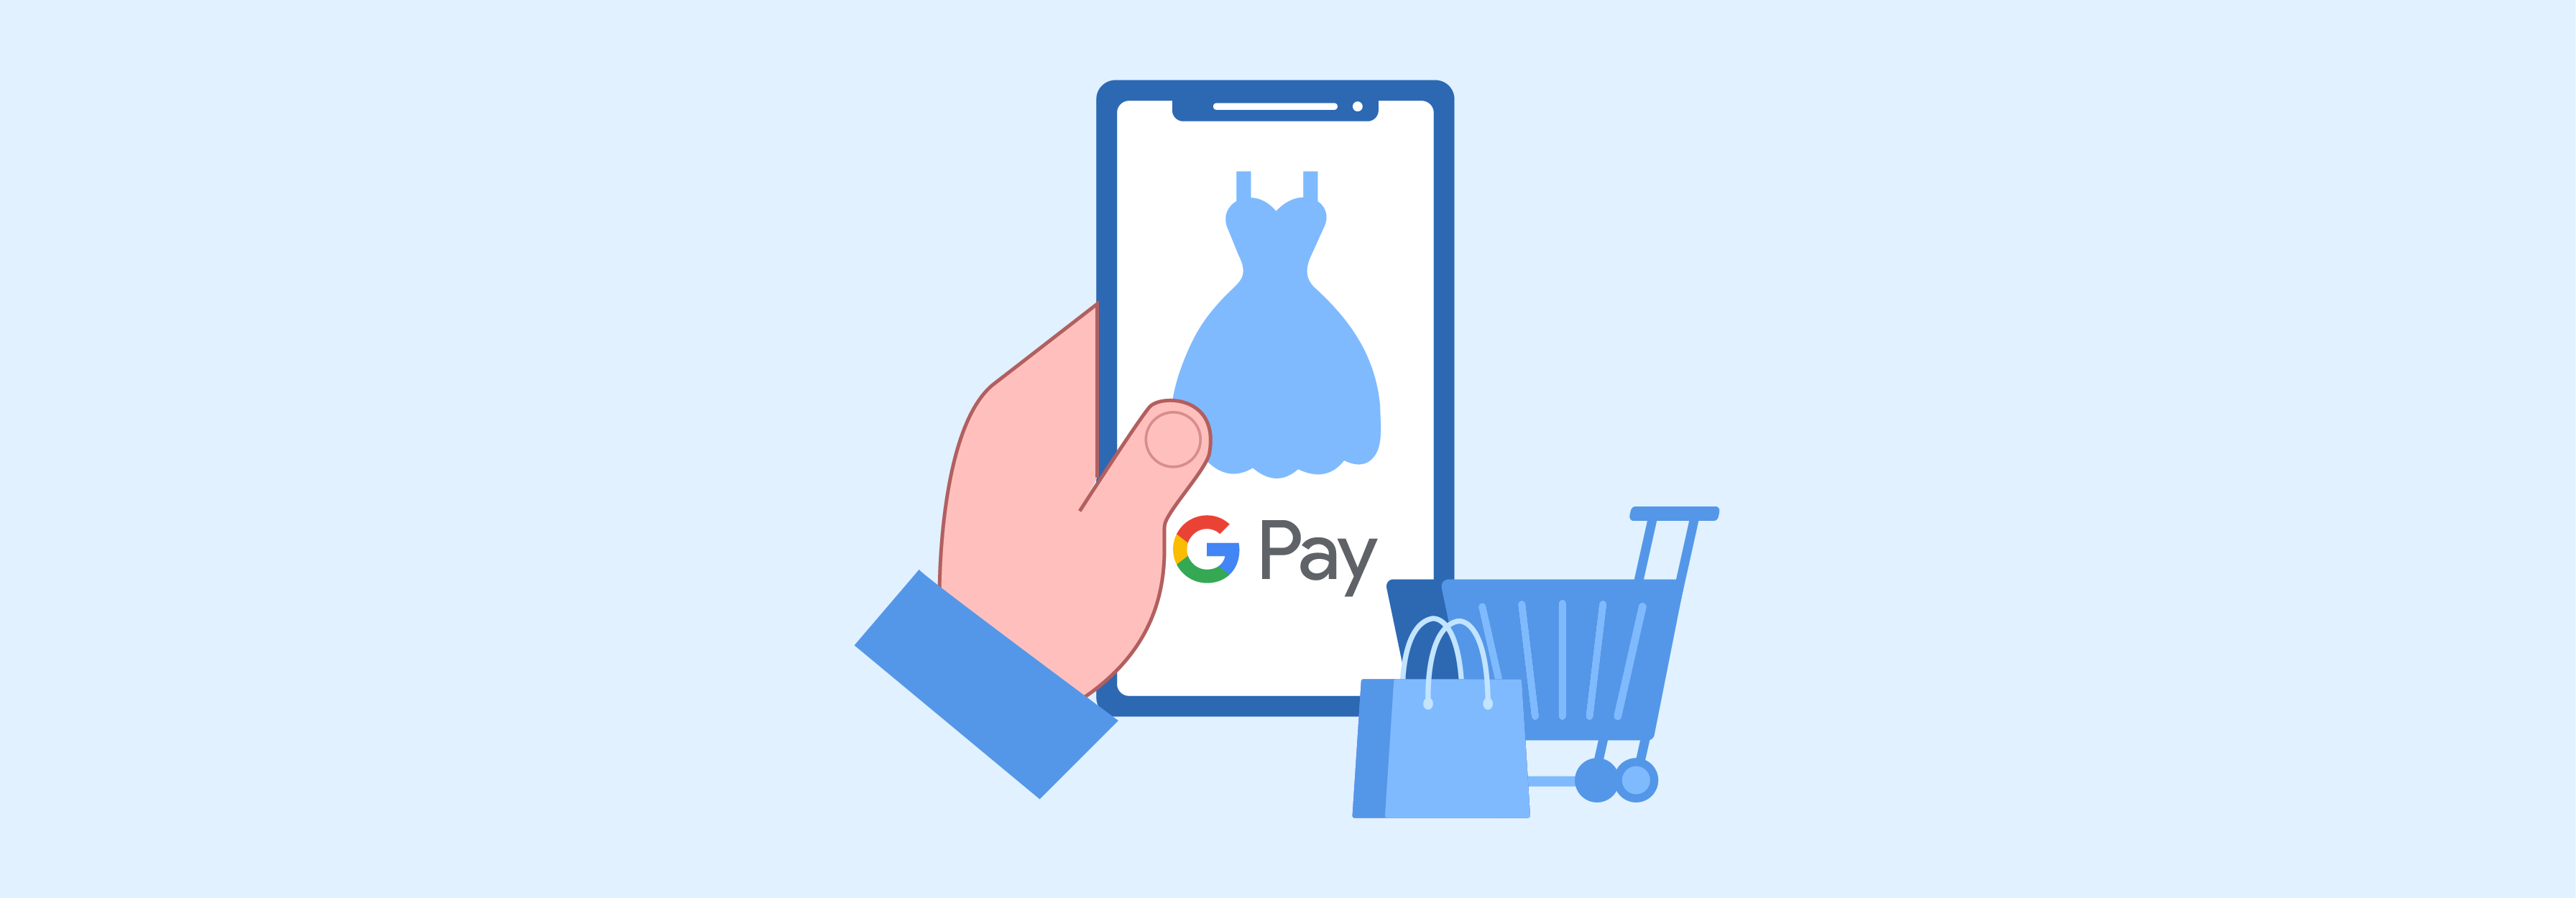 Google Pay Benefits for Magento Store